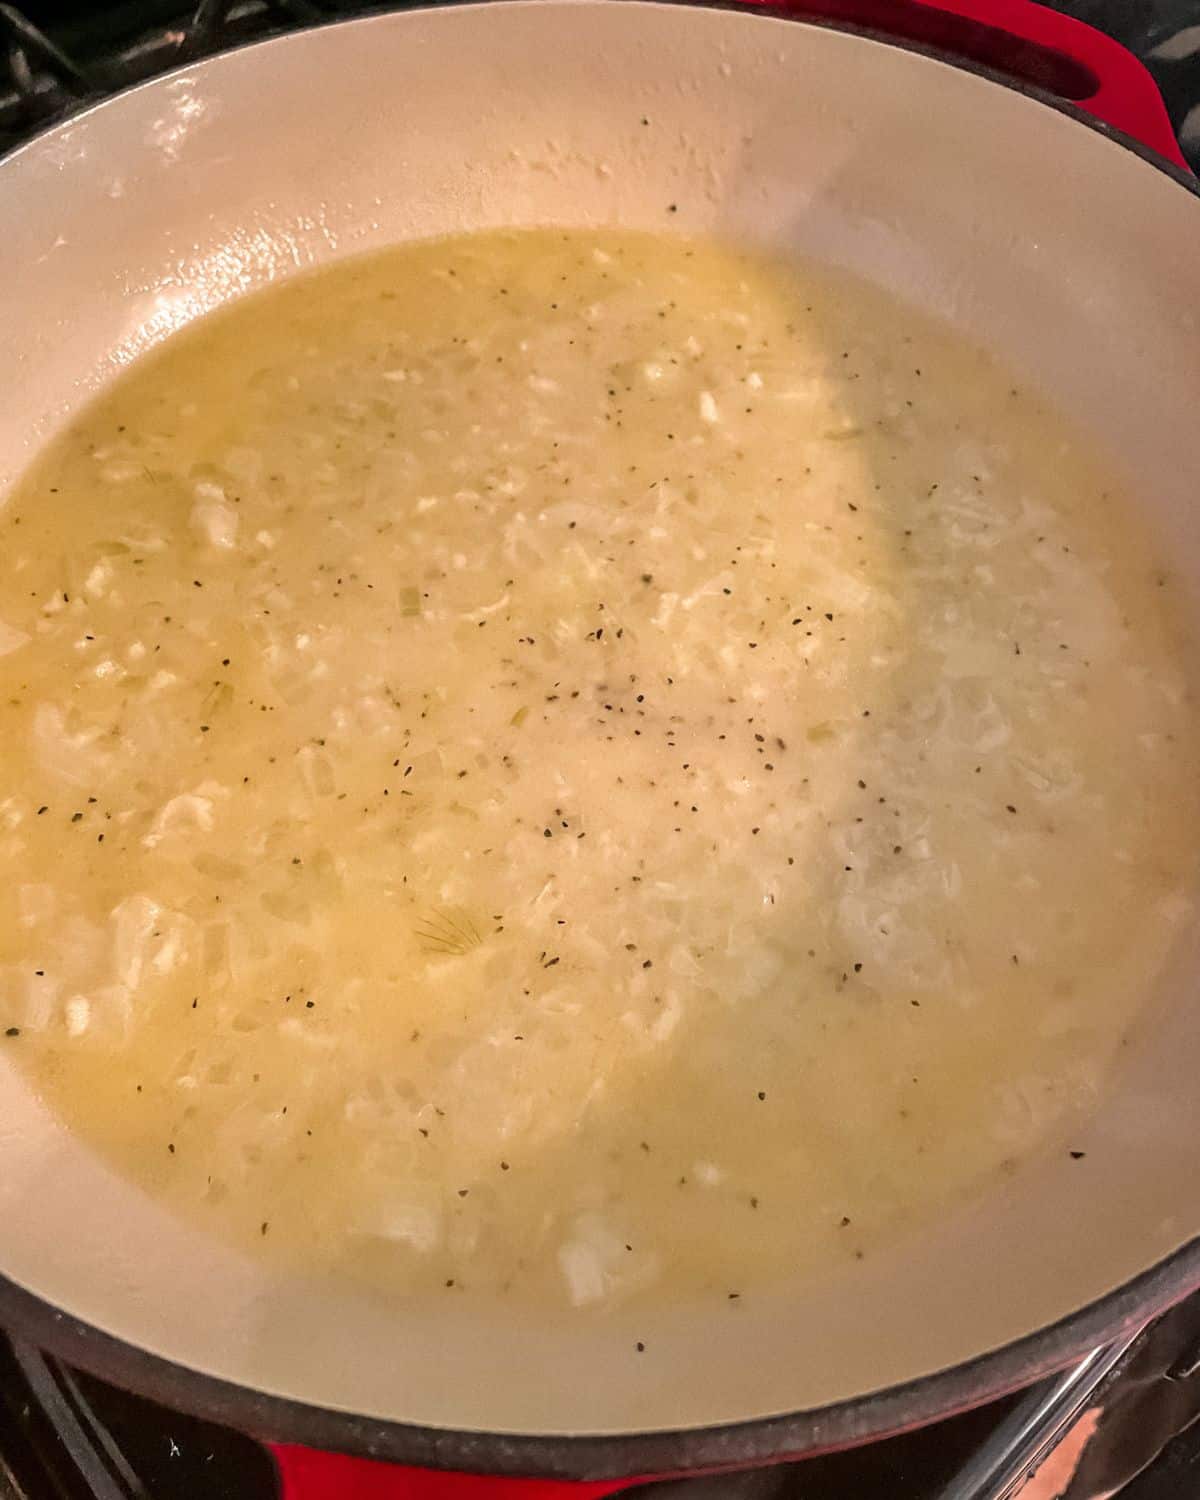 Garlic, butter, lemon and white wine sauce in a large skillet with red handles.